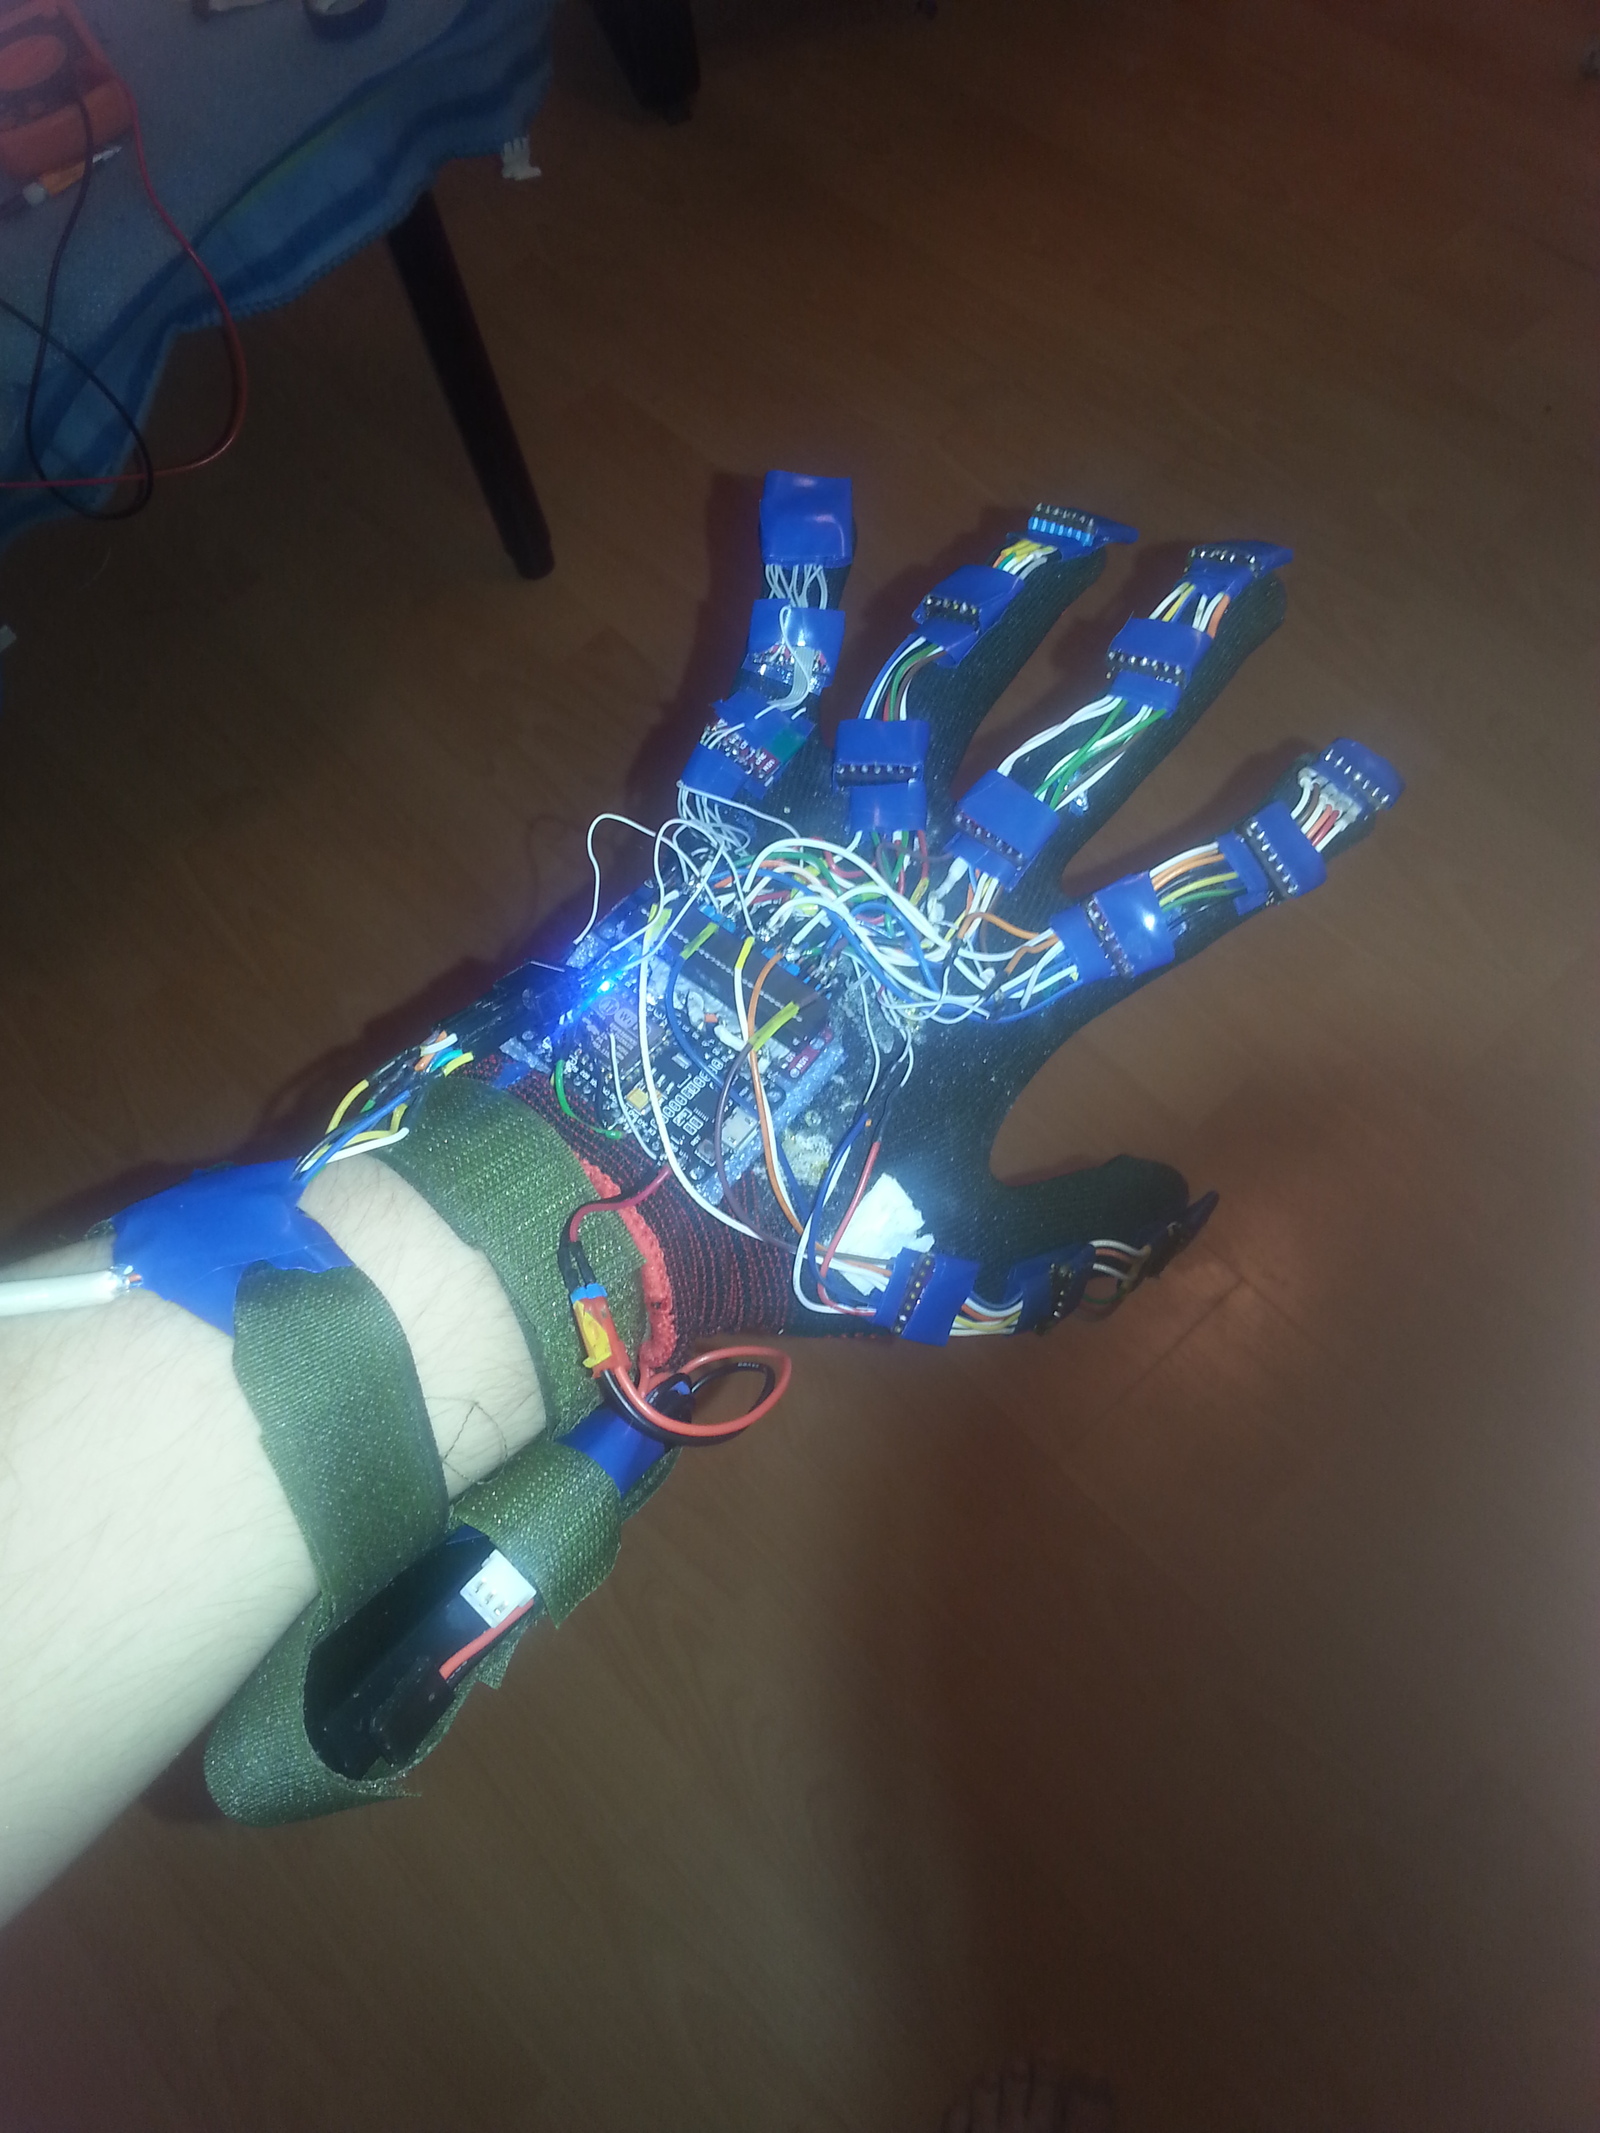 E-Learning. - My, Mocap, Arduino, Esp8266, Science and technology, Postgraduate studies, Research, Longpost